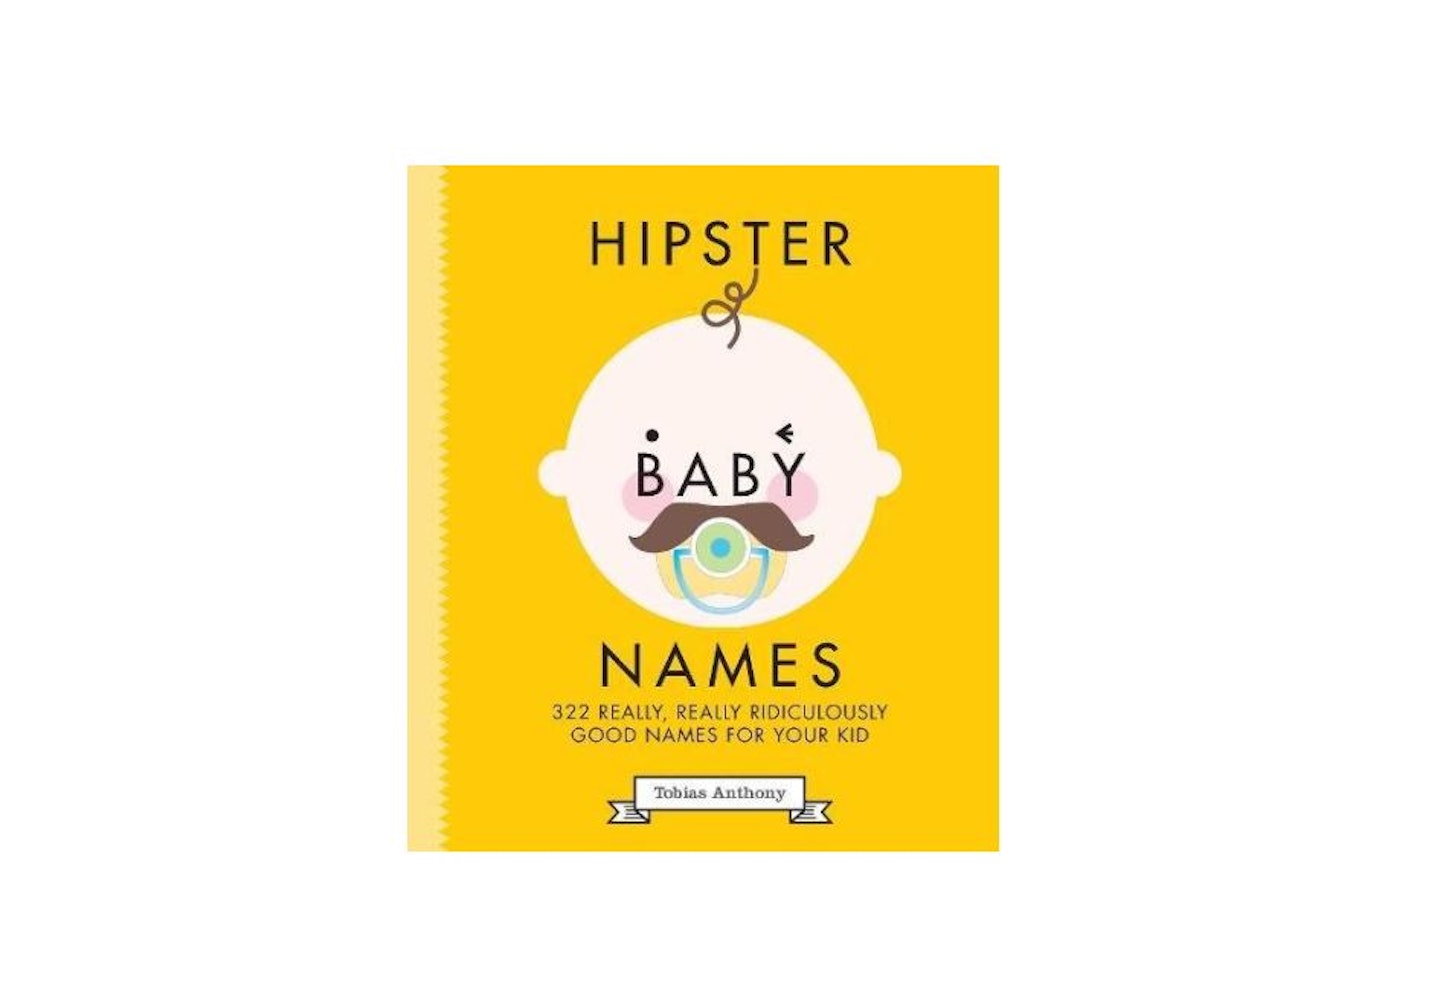 Hipster Baby Names, £9.99